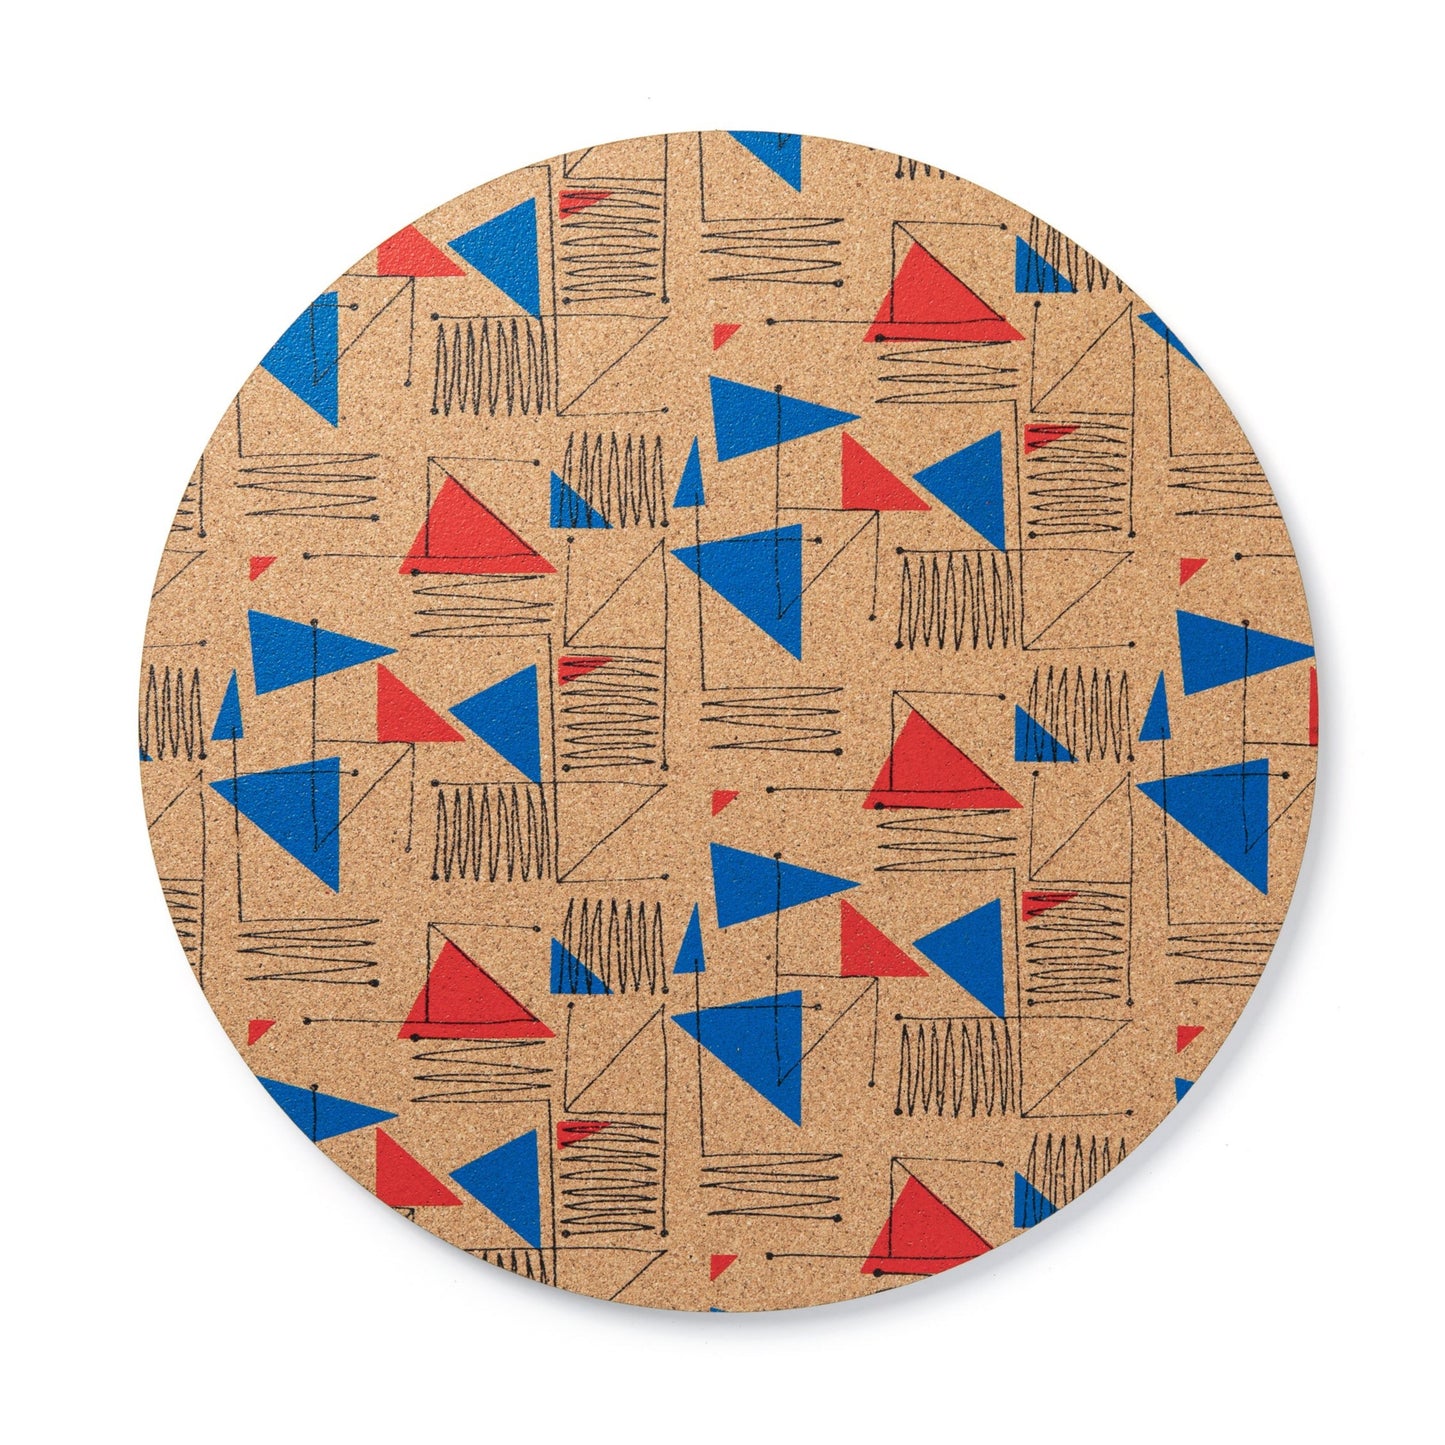 A 1950's inspired surface pattern design red and blue is screen printed onto cork to create a colourful and stylish placemat for dining.